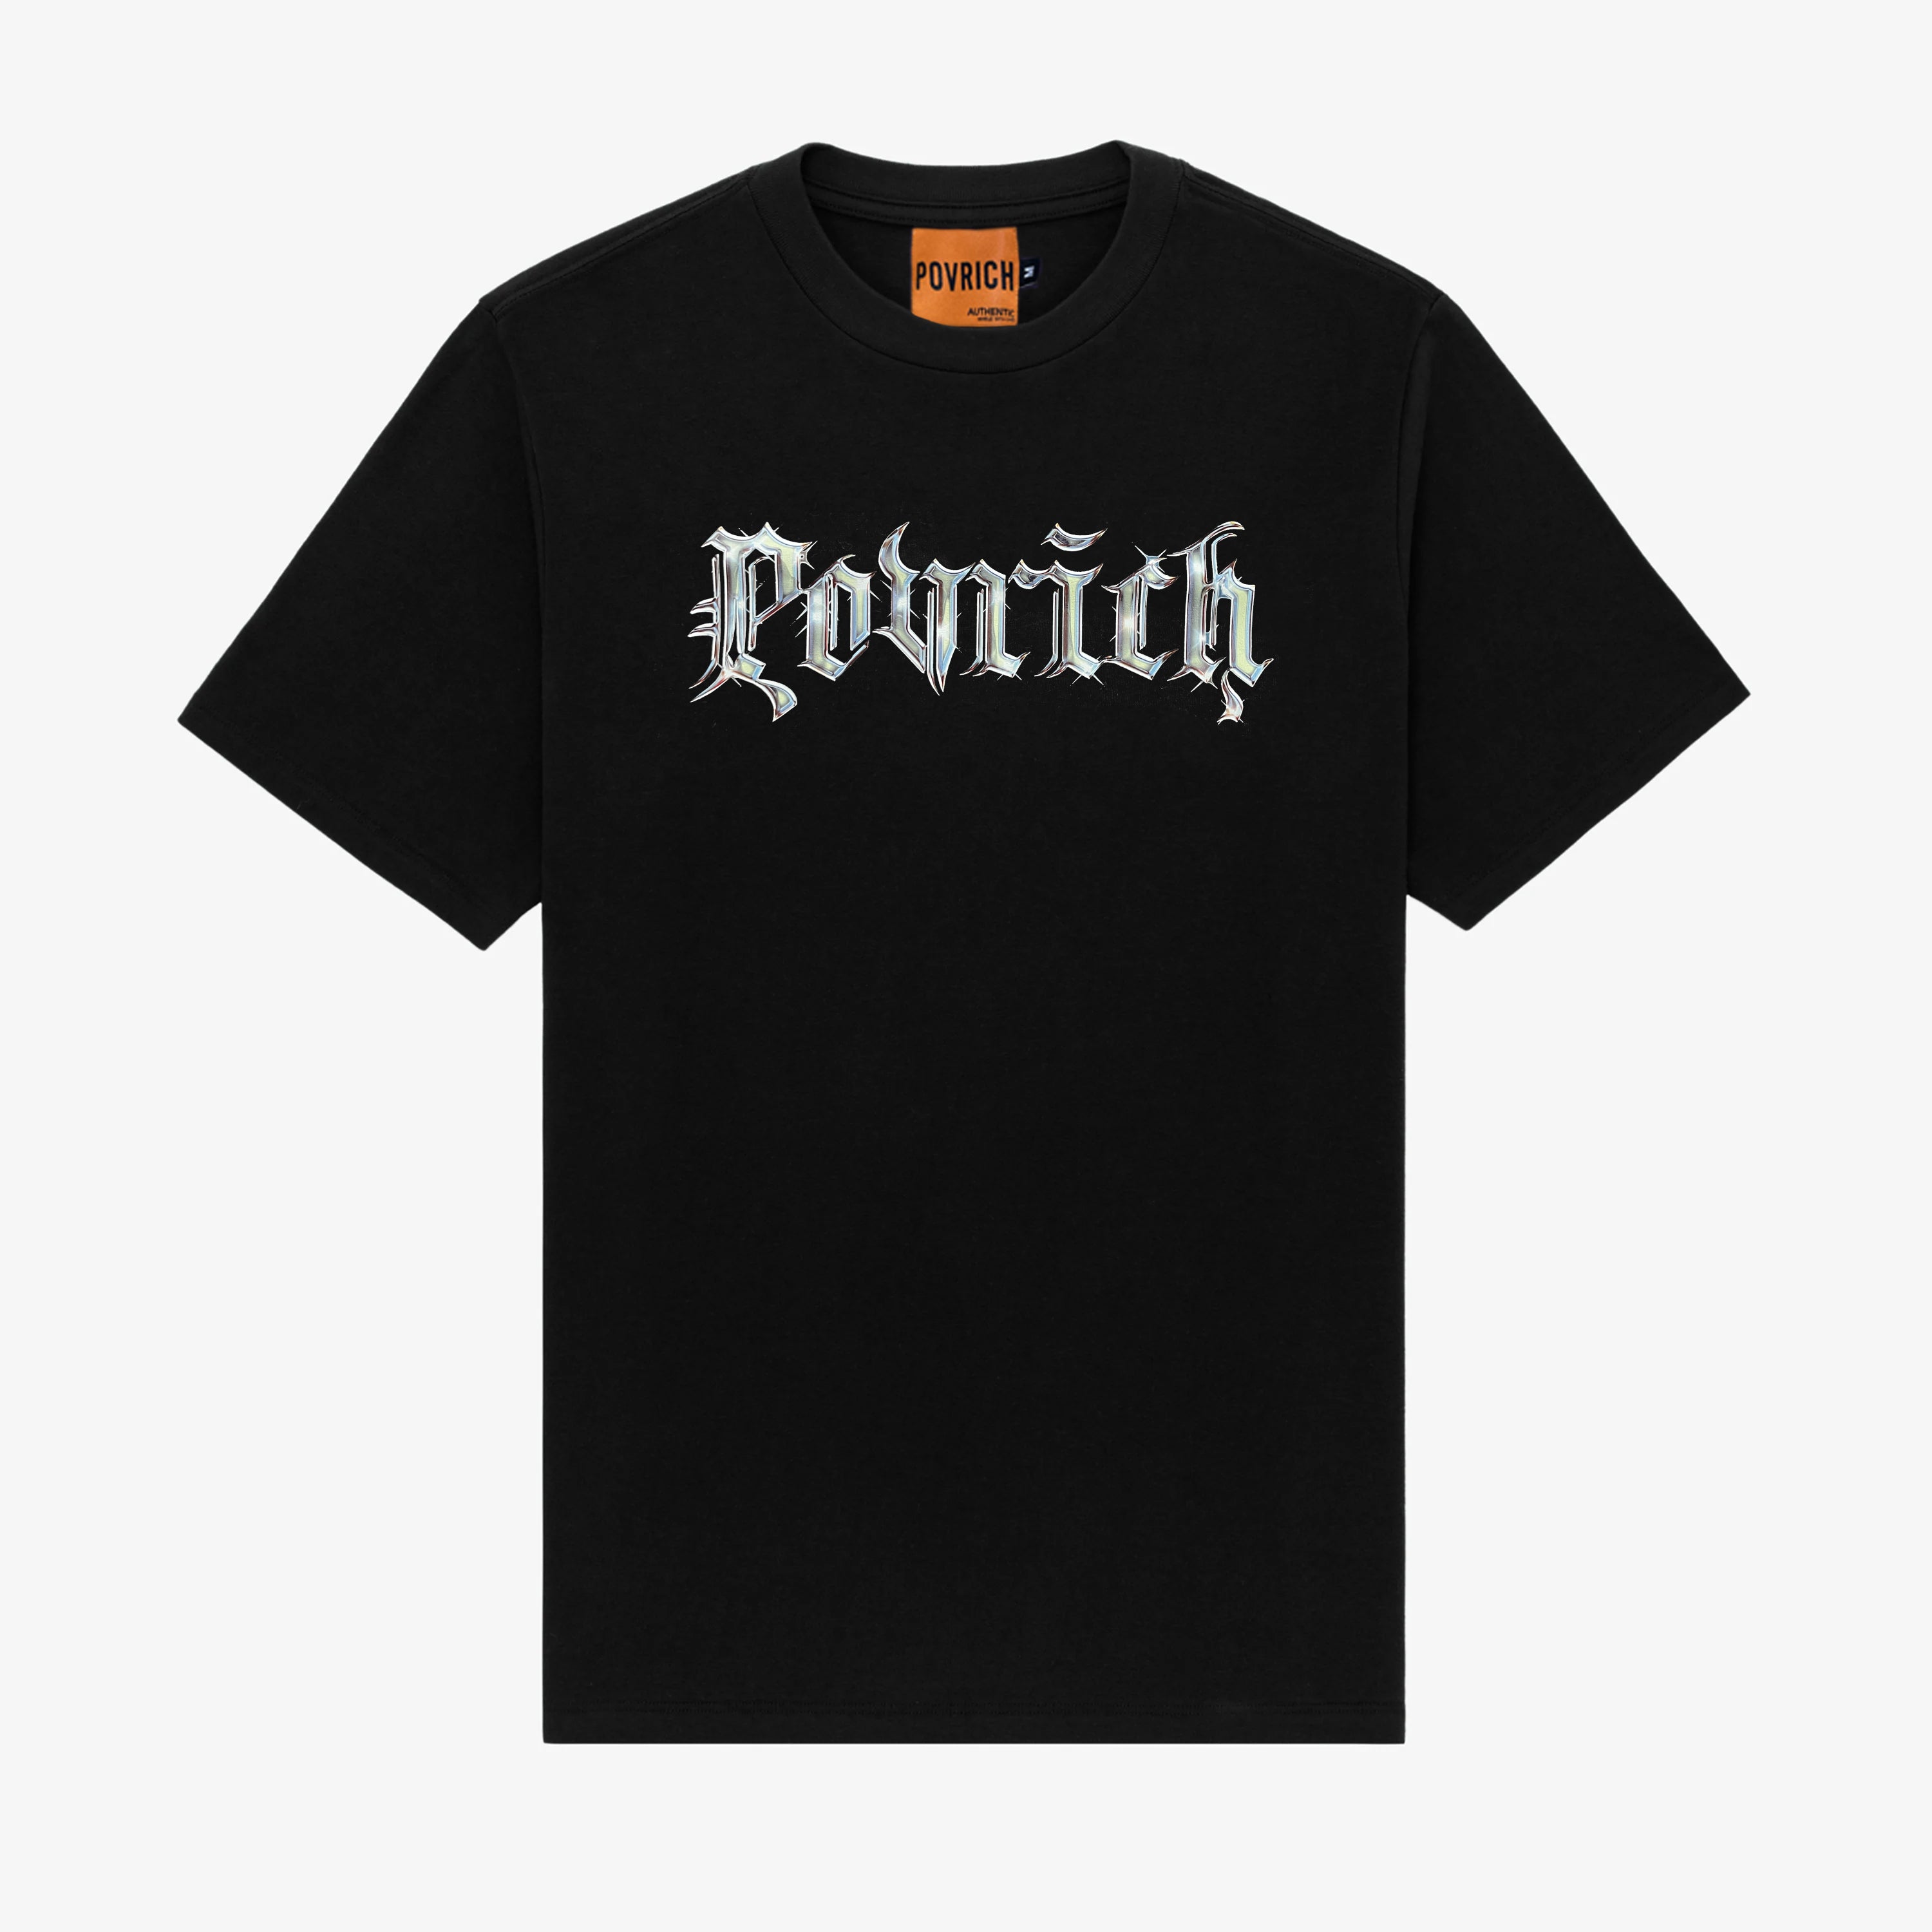 Povrich Chrome Tee with chrome logo graphic on the front available in black. 